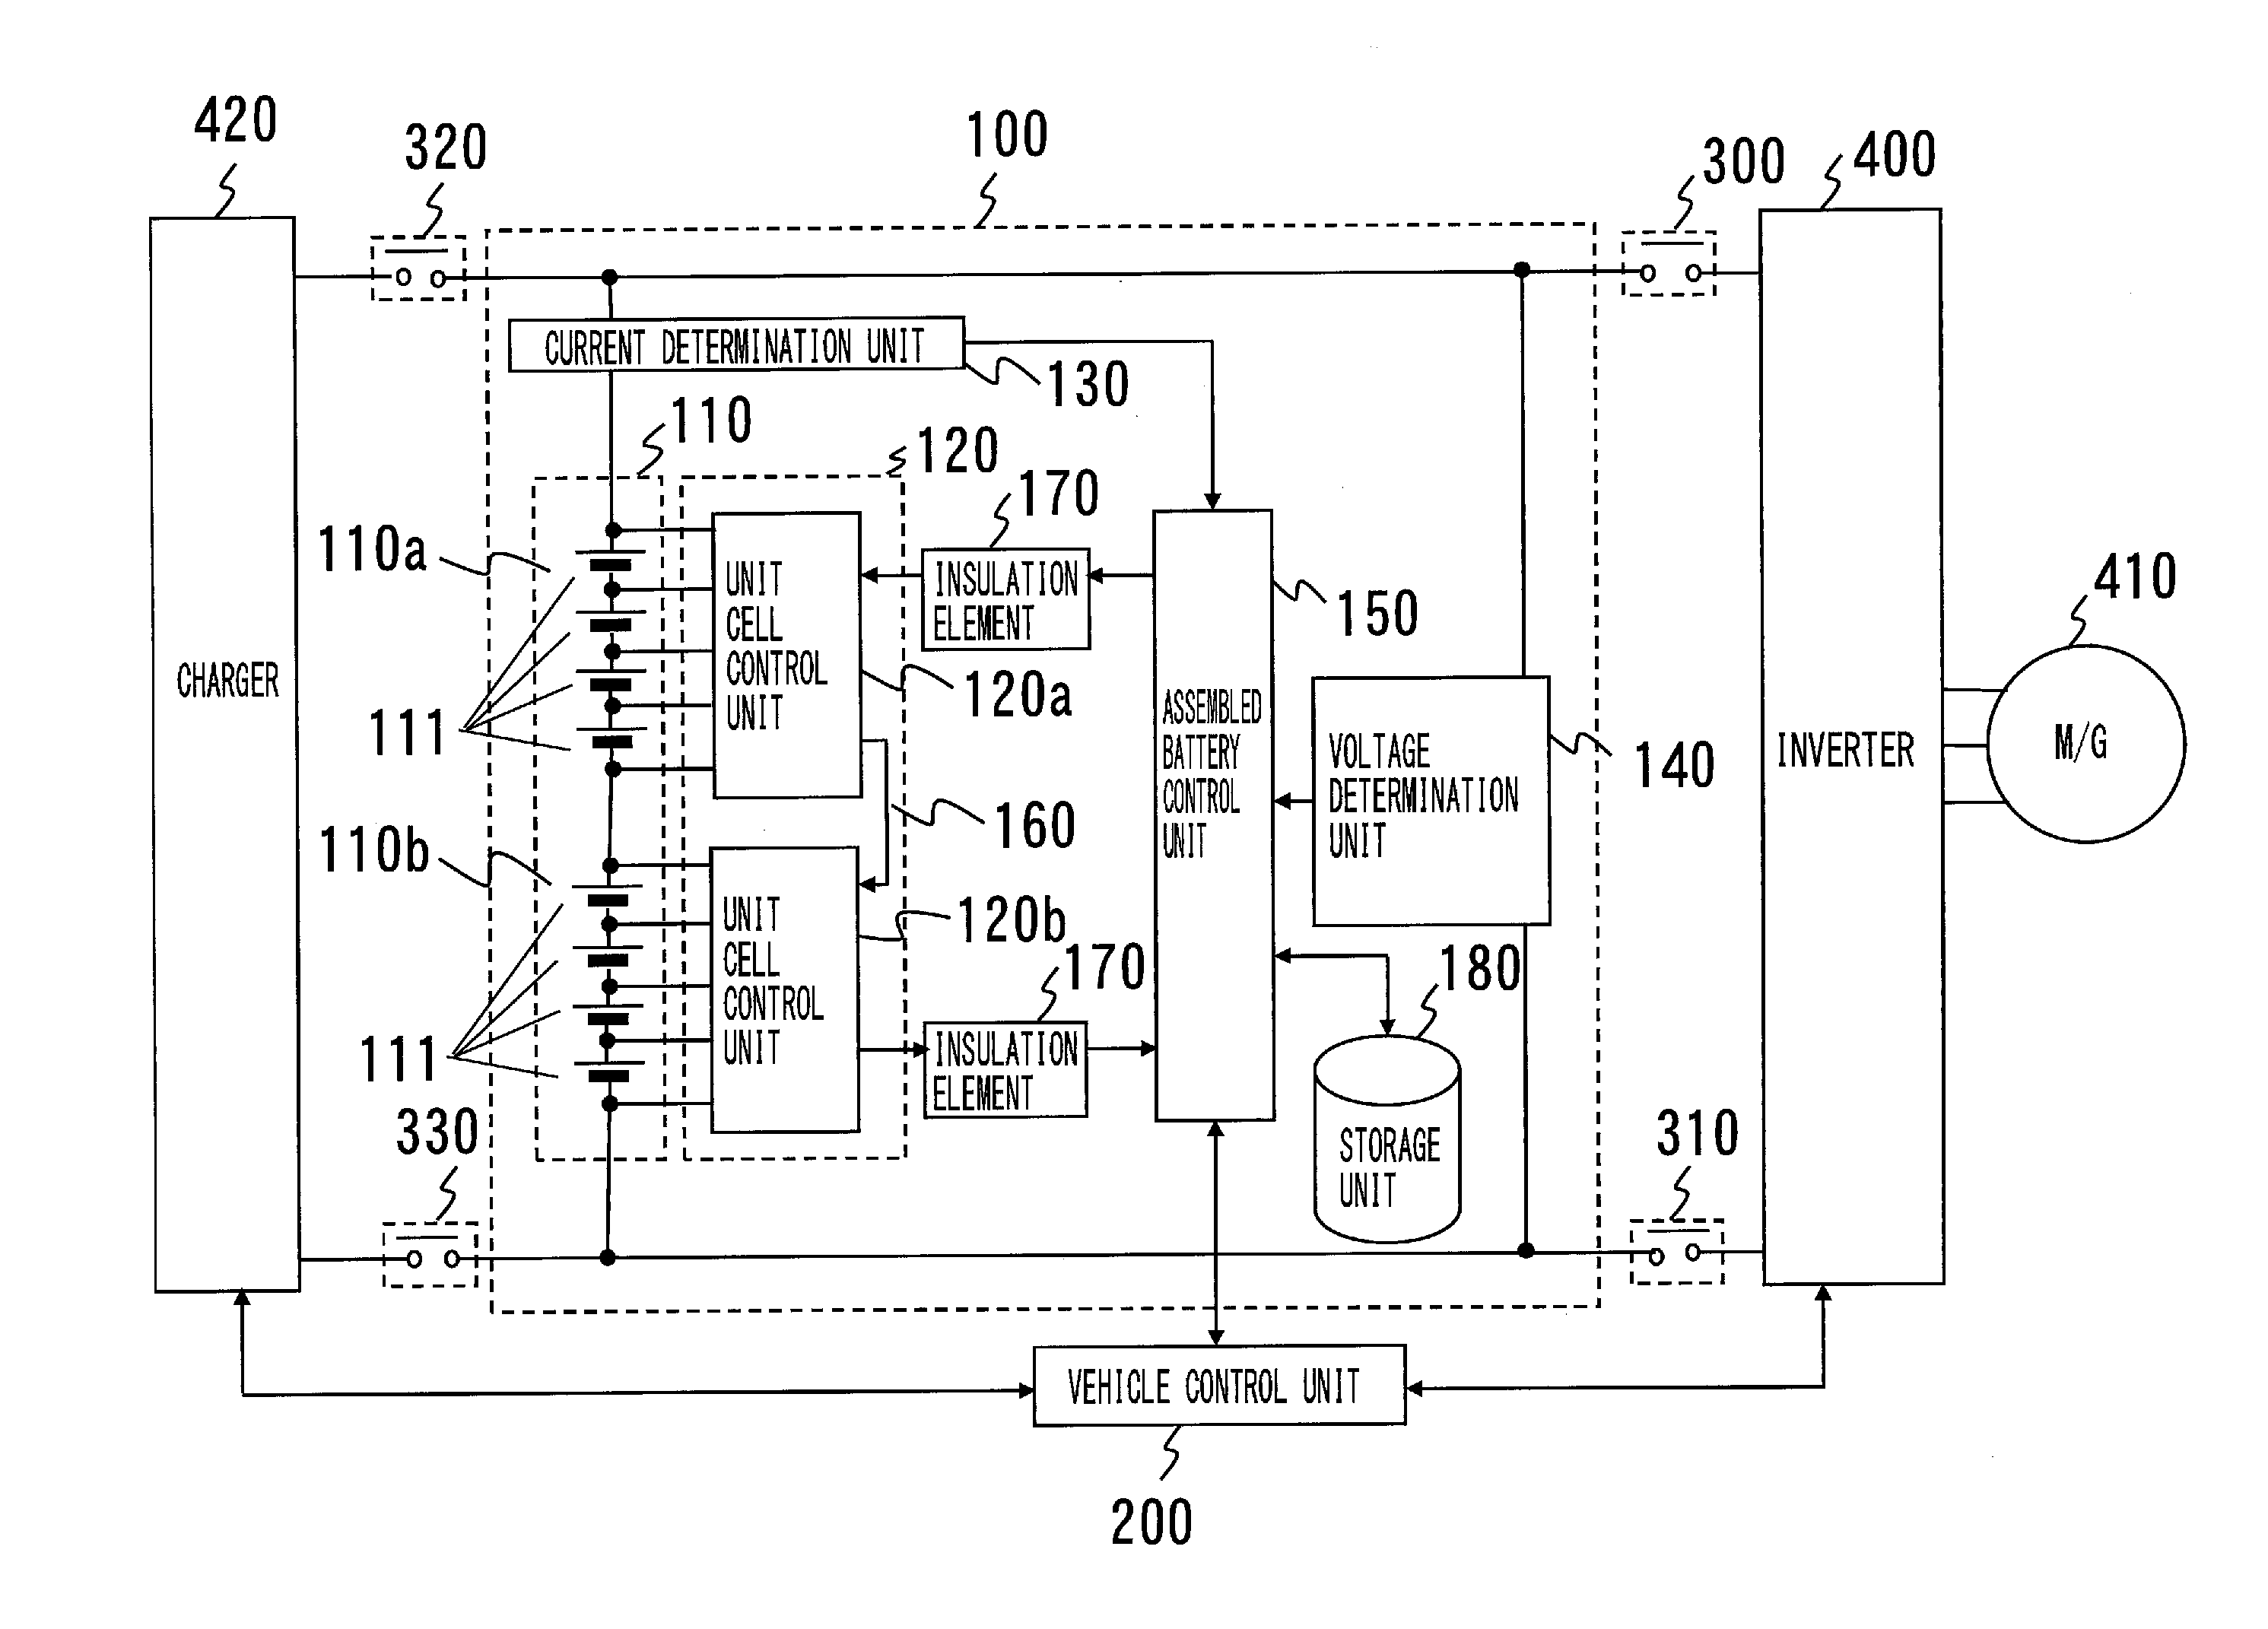 Device for Assessing Extent of Degradation of Secondary Battery